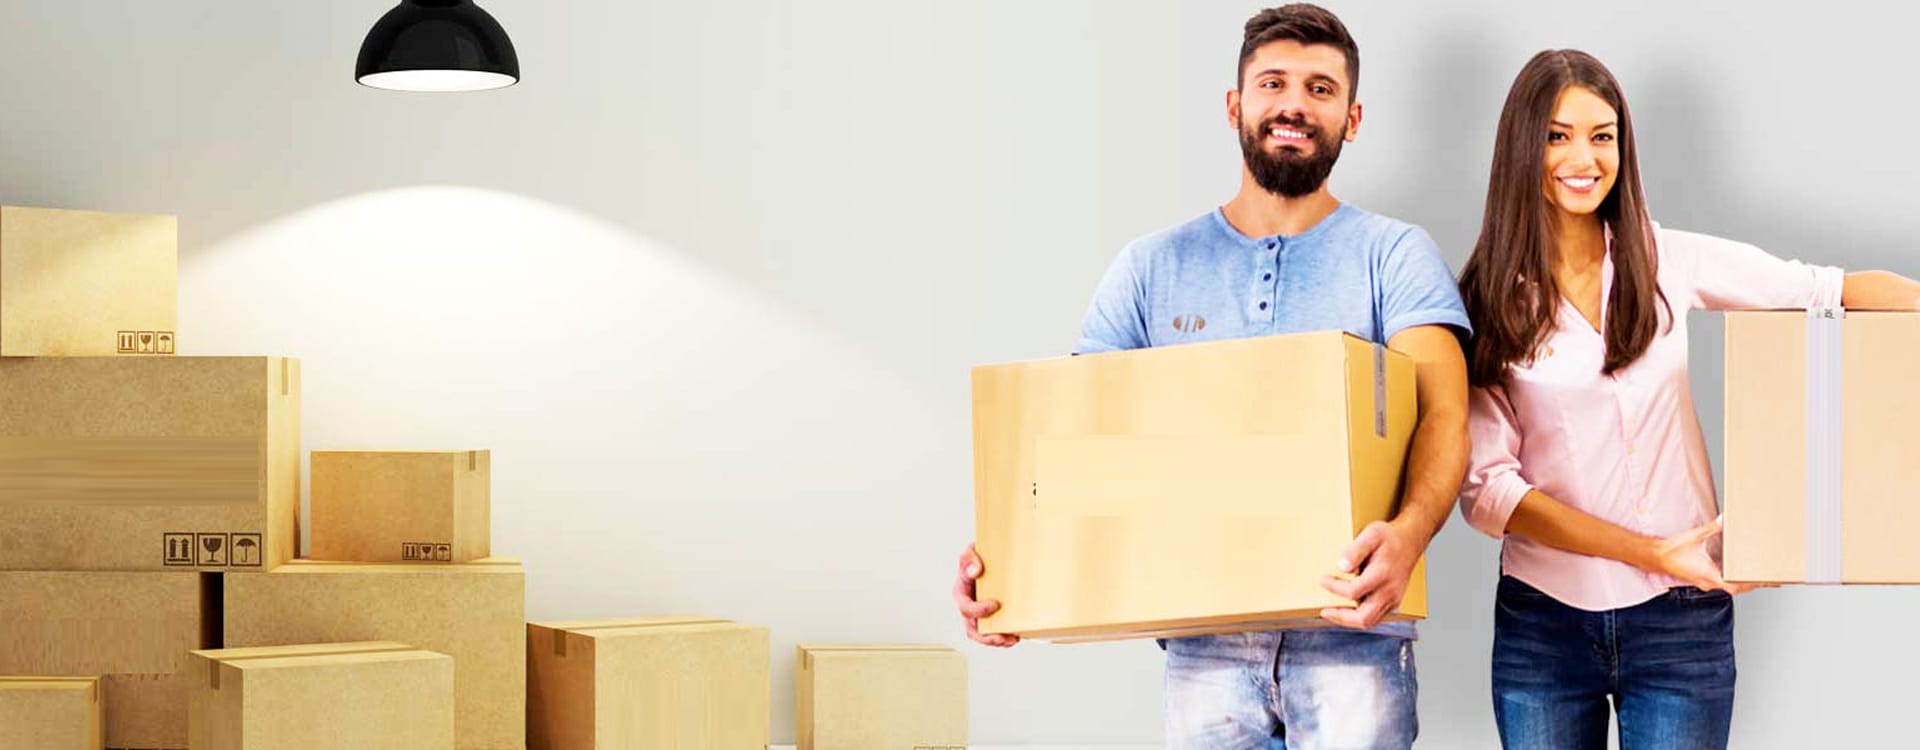 Packers and Movers in Sion West Mumbai